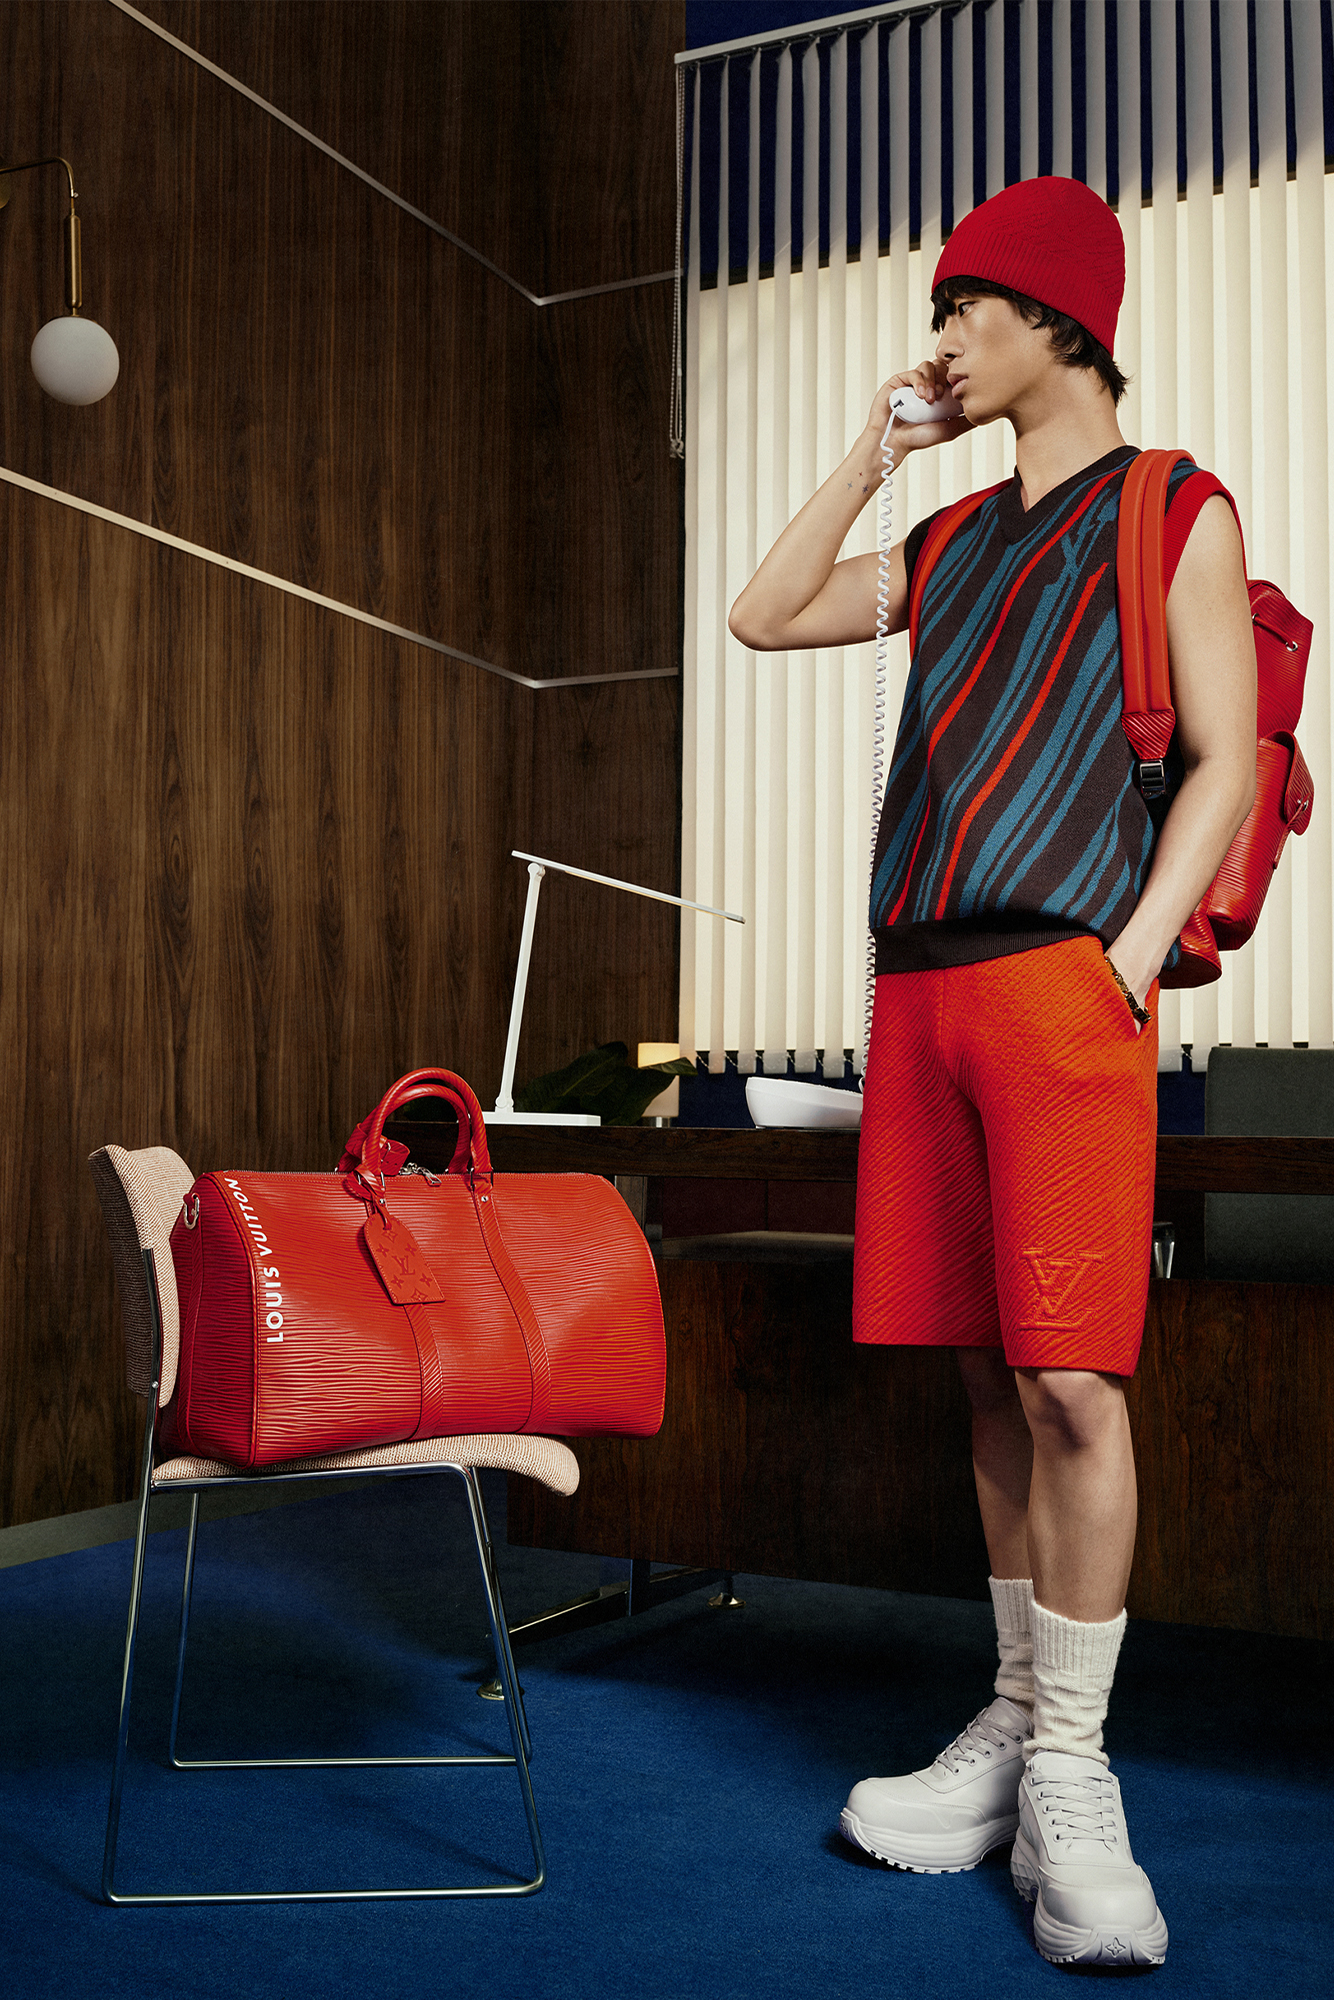 Model for Louis Vuitton Studio Prêt-à-Porter Homme with red shorts, vest, and red hat